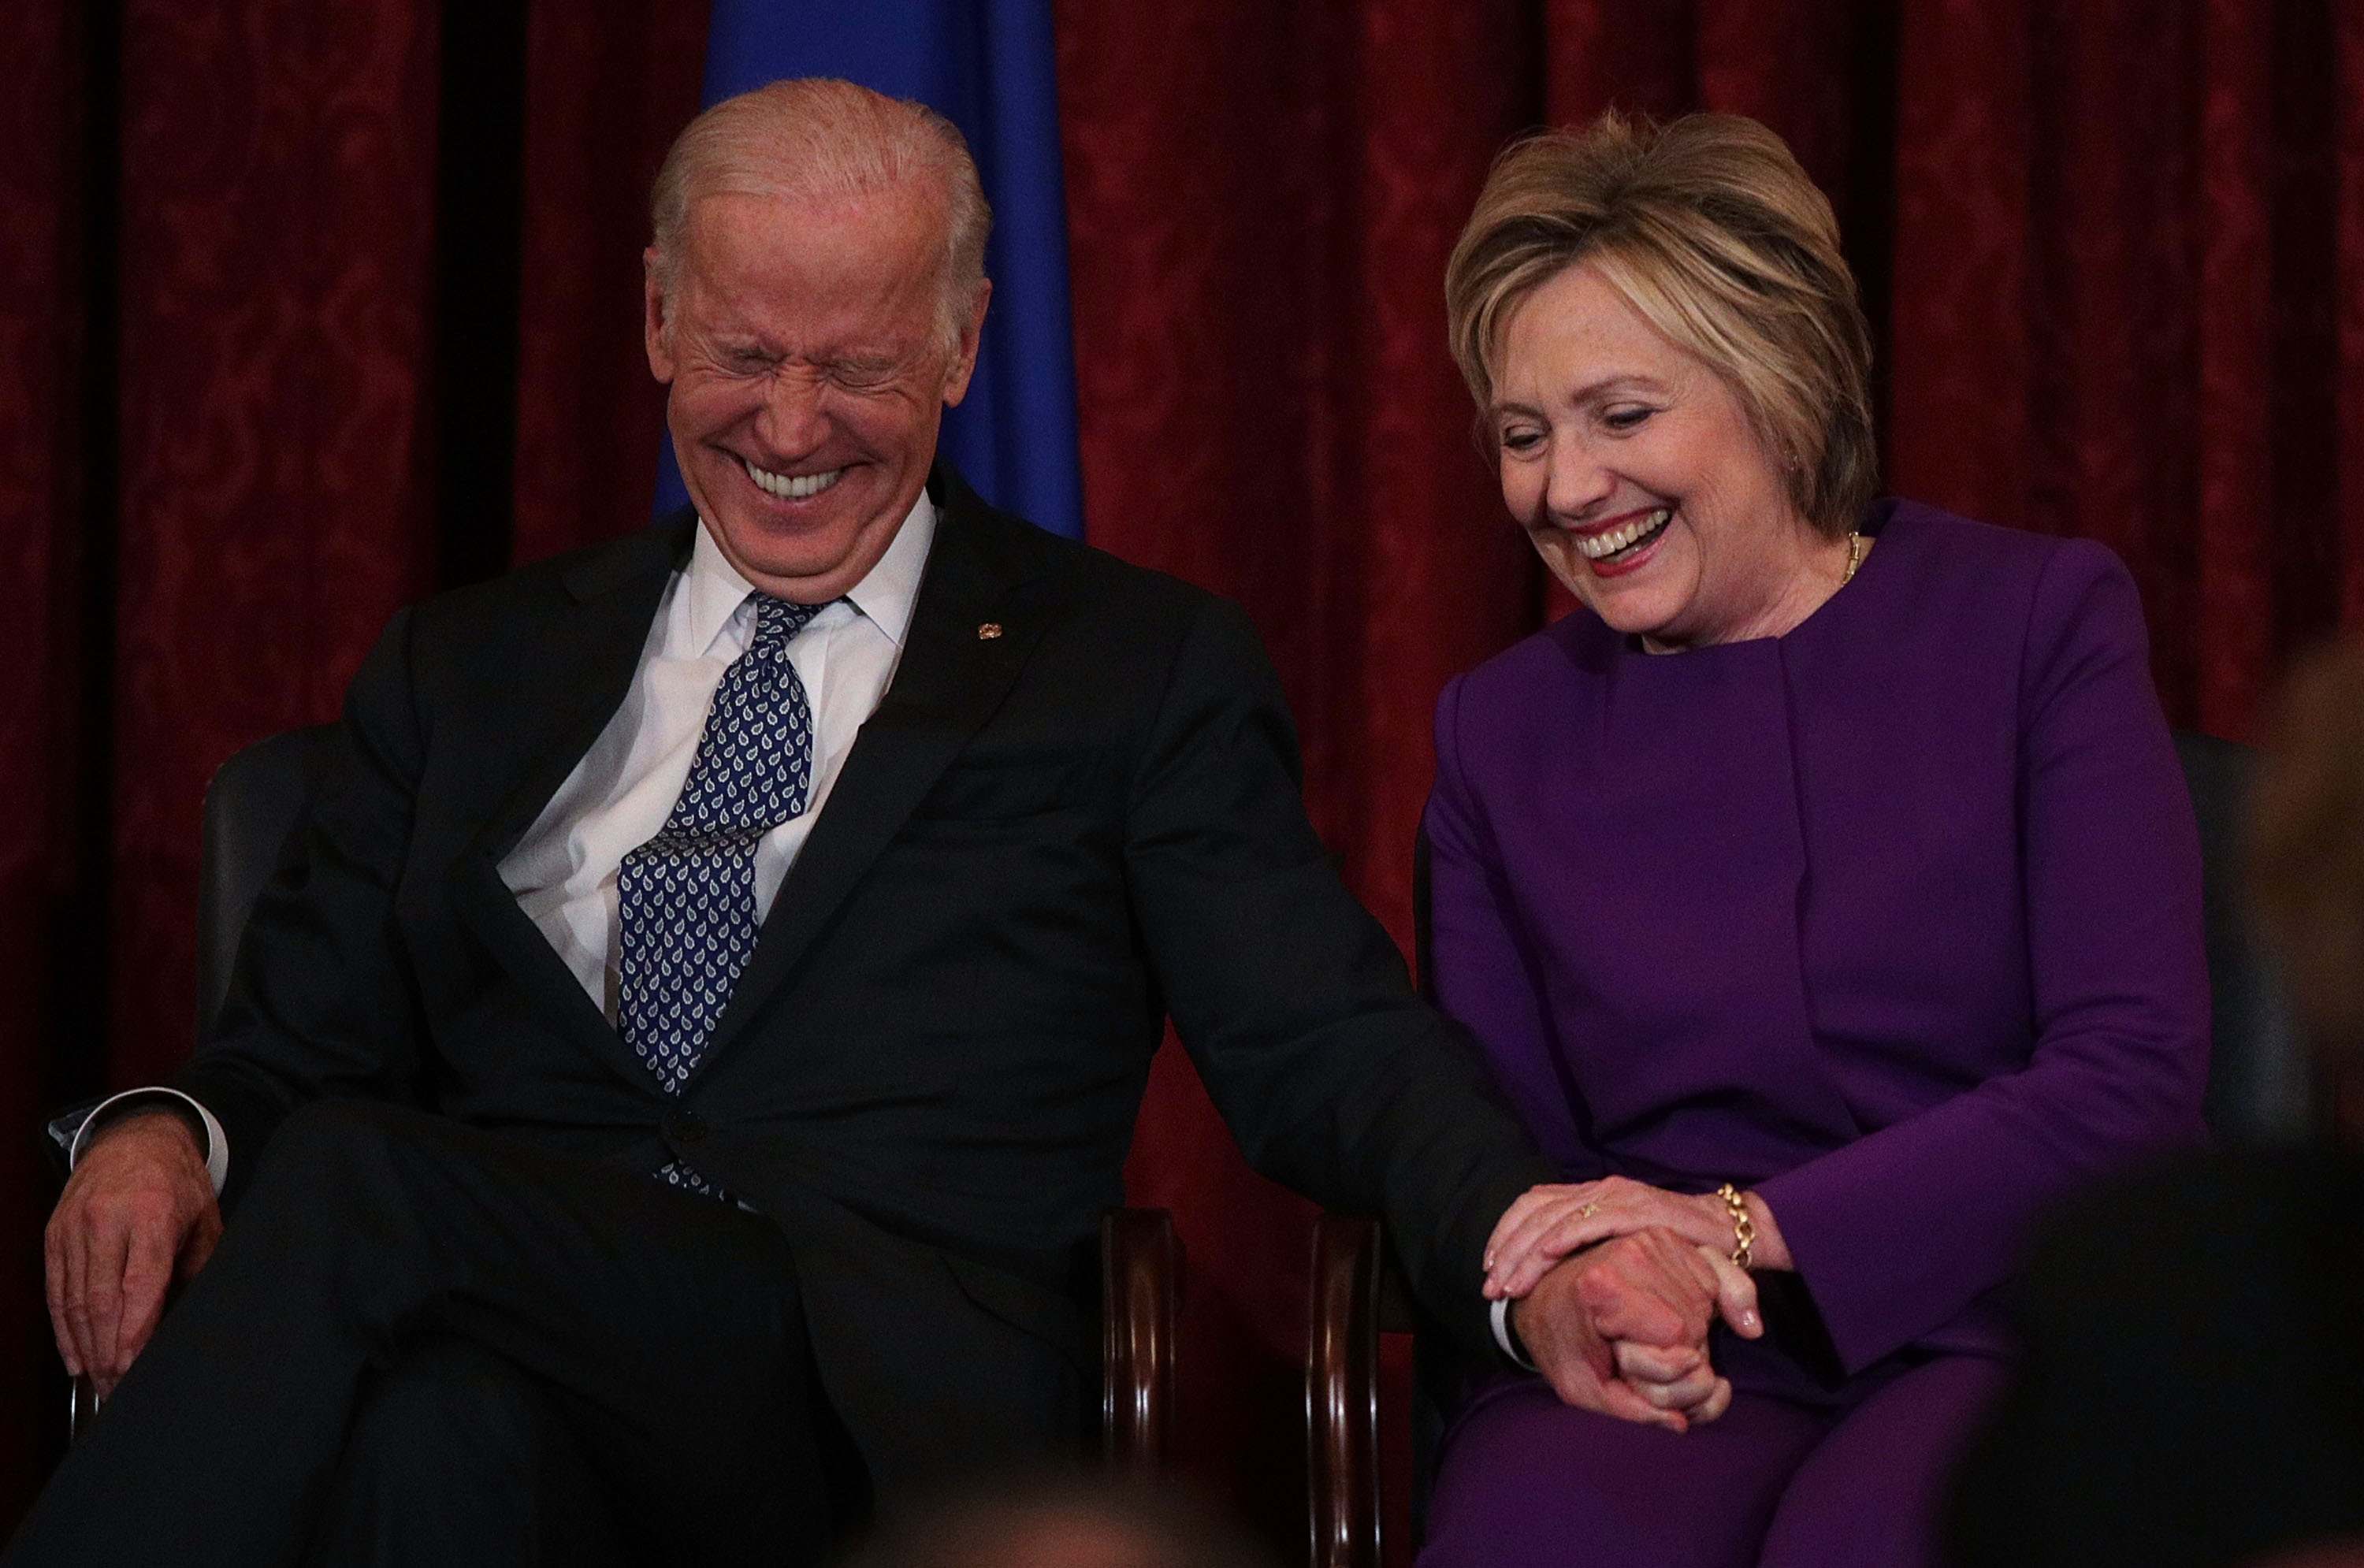 Former U.S. Secretary of State Hillary Clinton (R) shares a moment with Vice President Joseph Biden (L) during a leadership portrait unveiling ceremony for Senate Minority Leader Sen. Harry Reid (D-NV) December 8, 2016 on Capitol Hill in Washington, DC.   (Alex Wong--Getty Images) (Alex Wong&mdash;Getty Images)